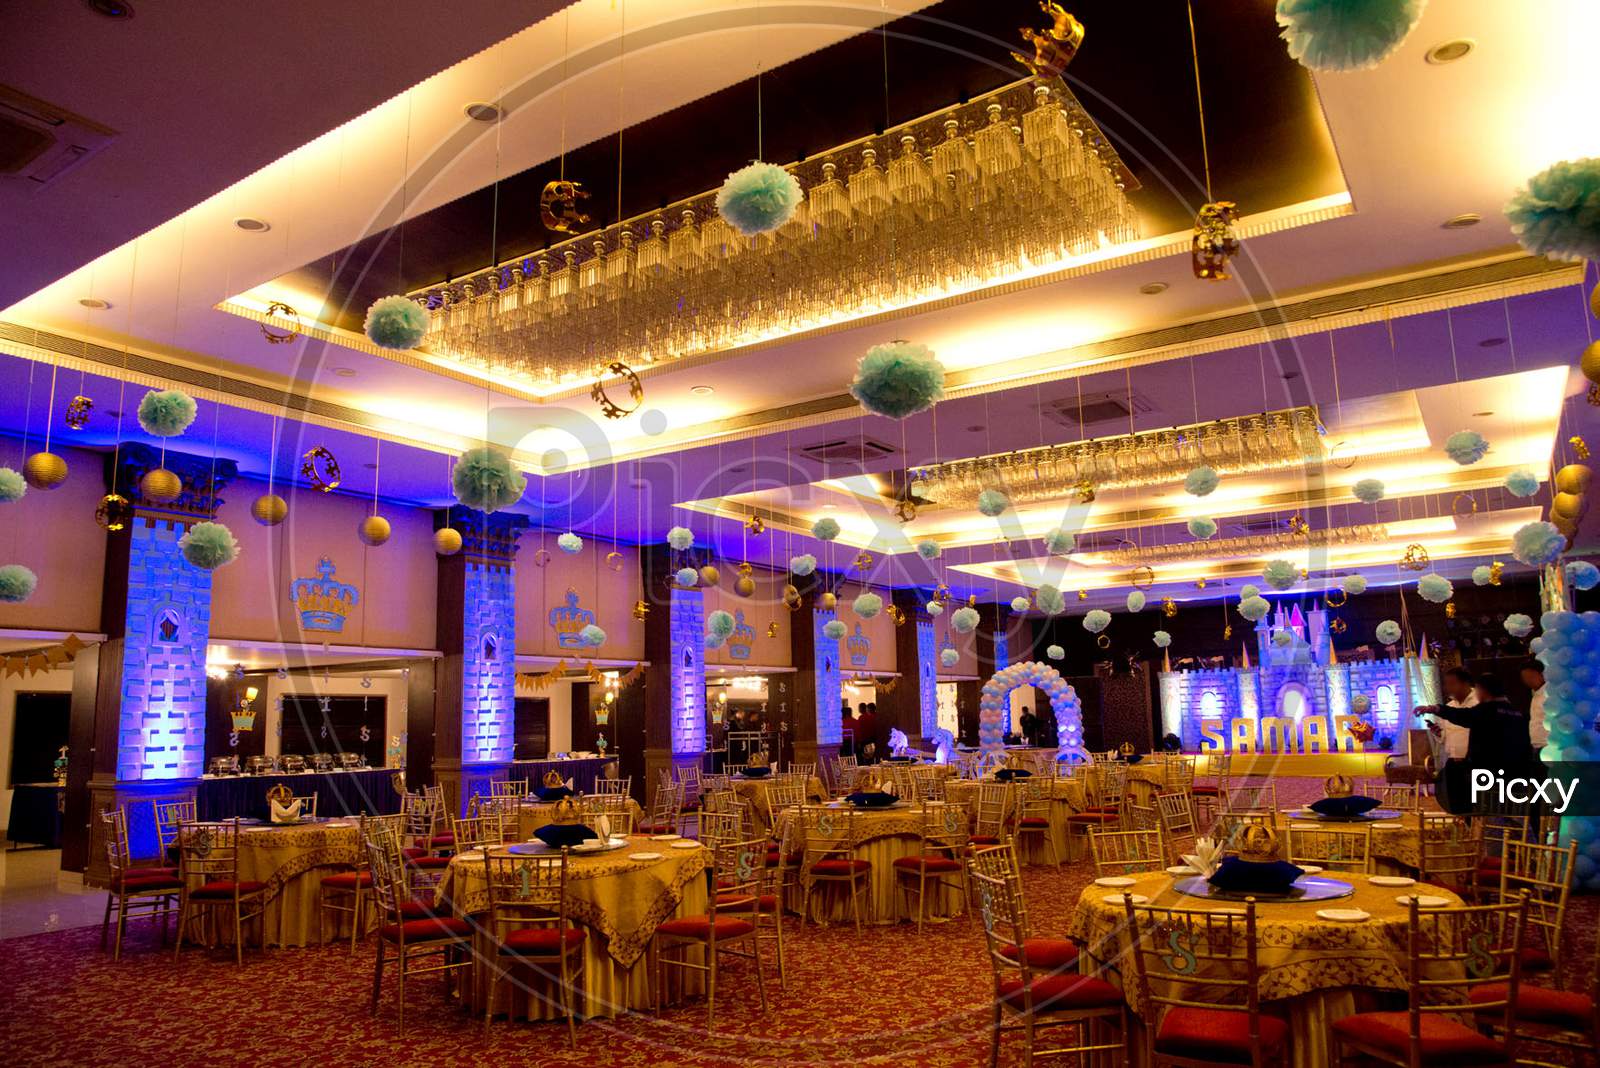 Restaurant interior decoration with seating chair and table, part of hotel for party and celebration.